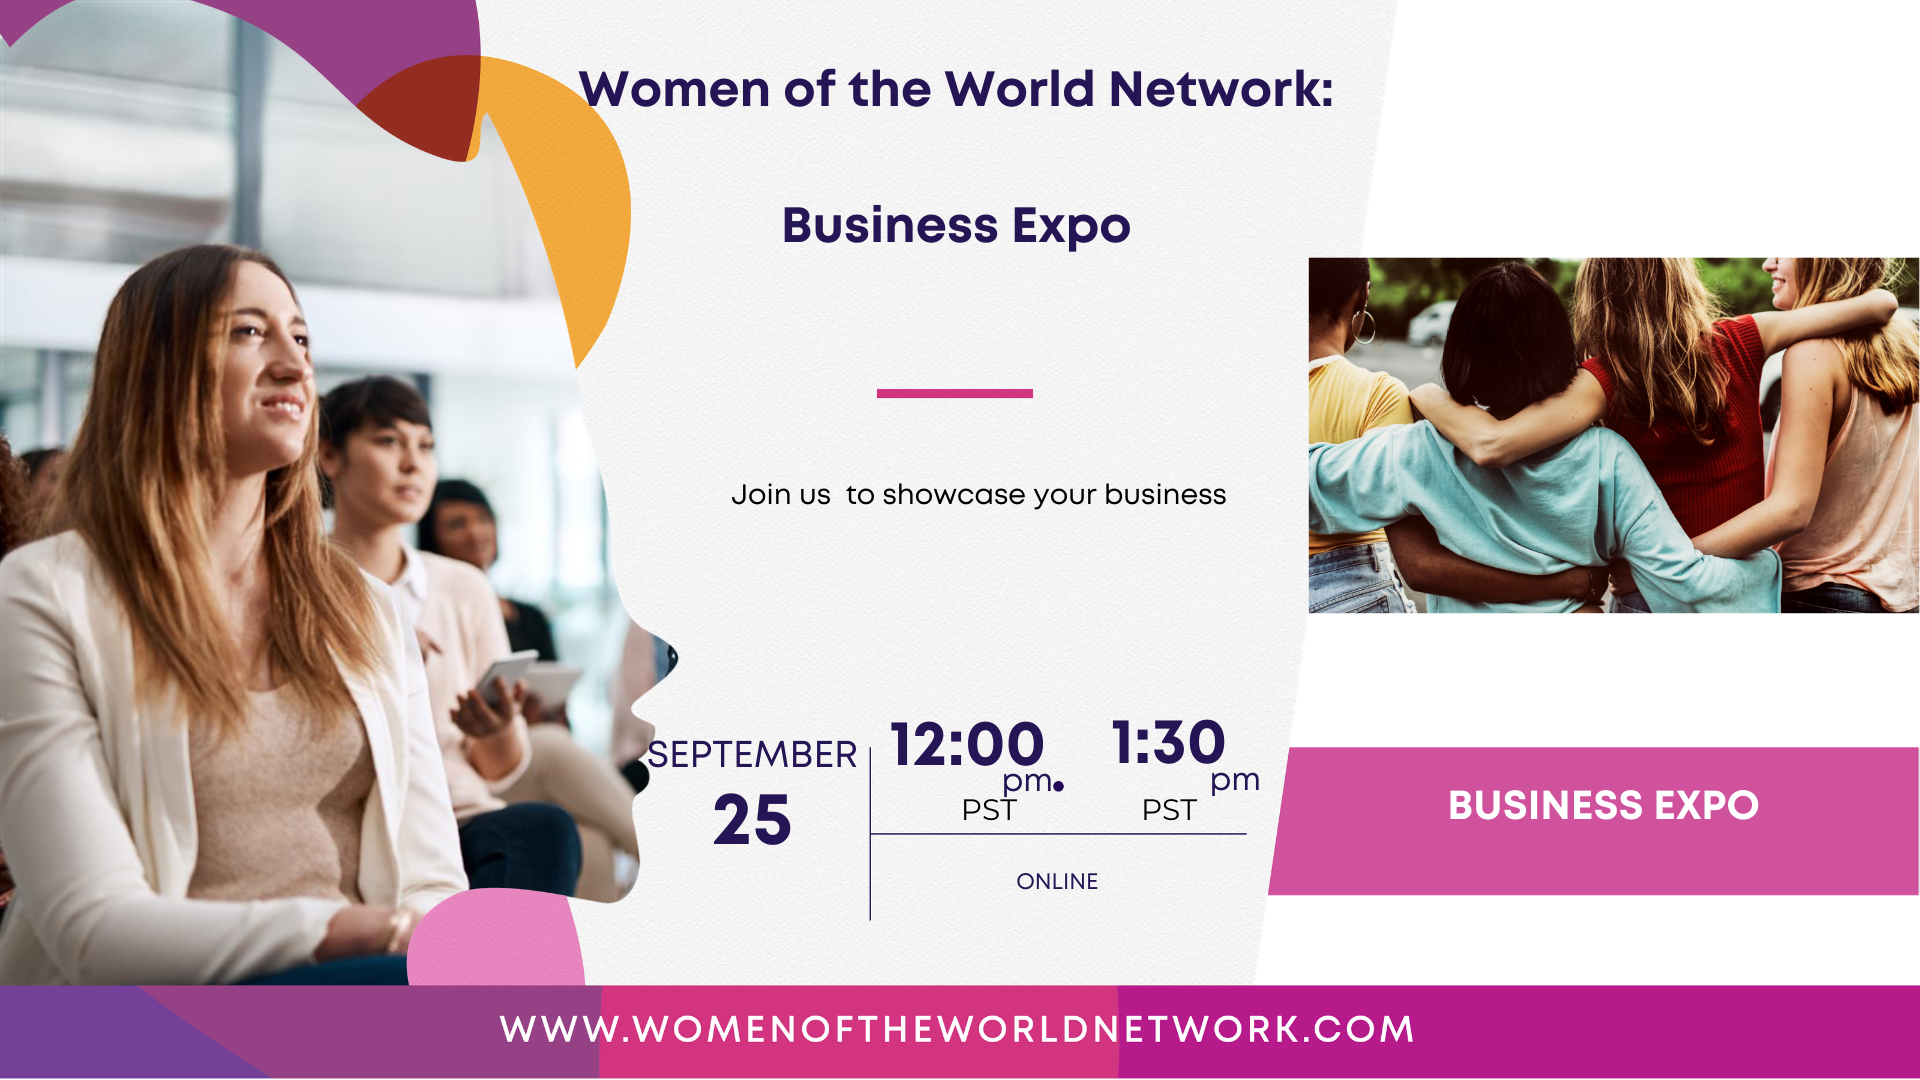 Women of the World Network: Business Expo